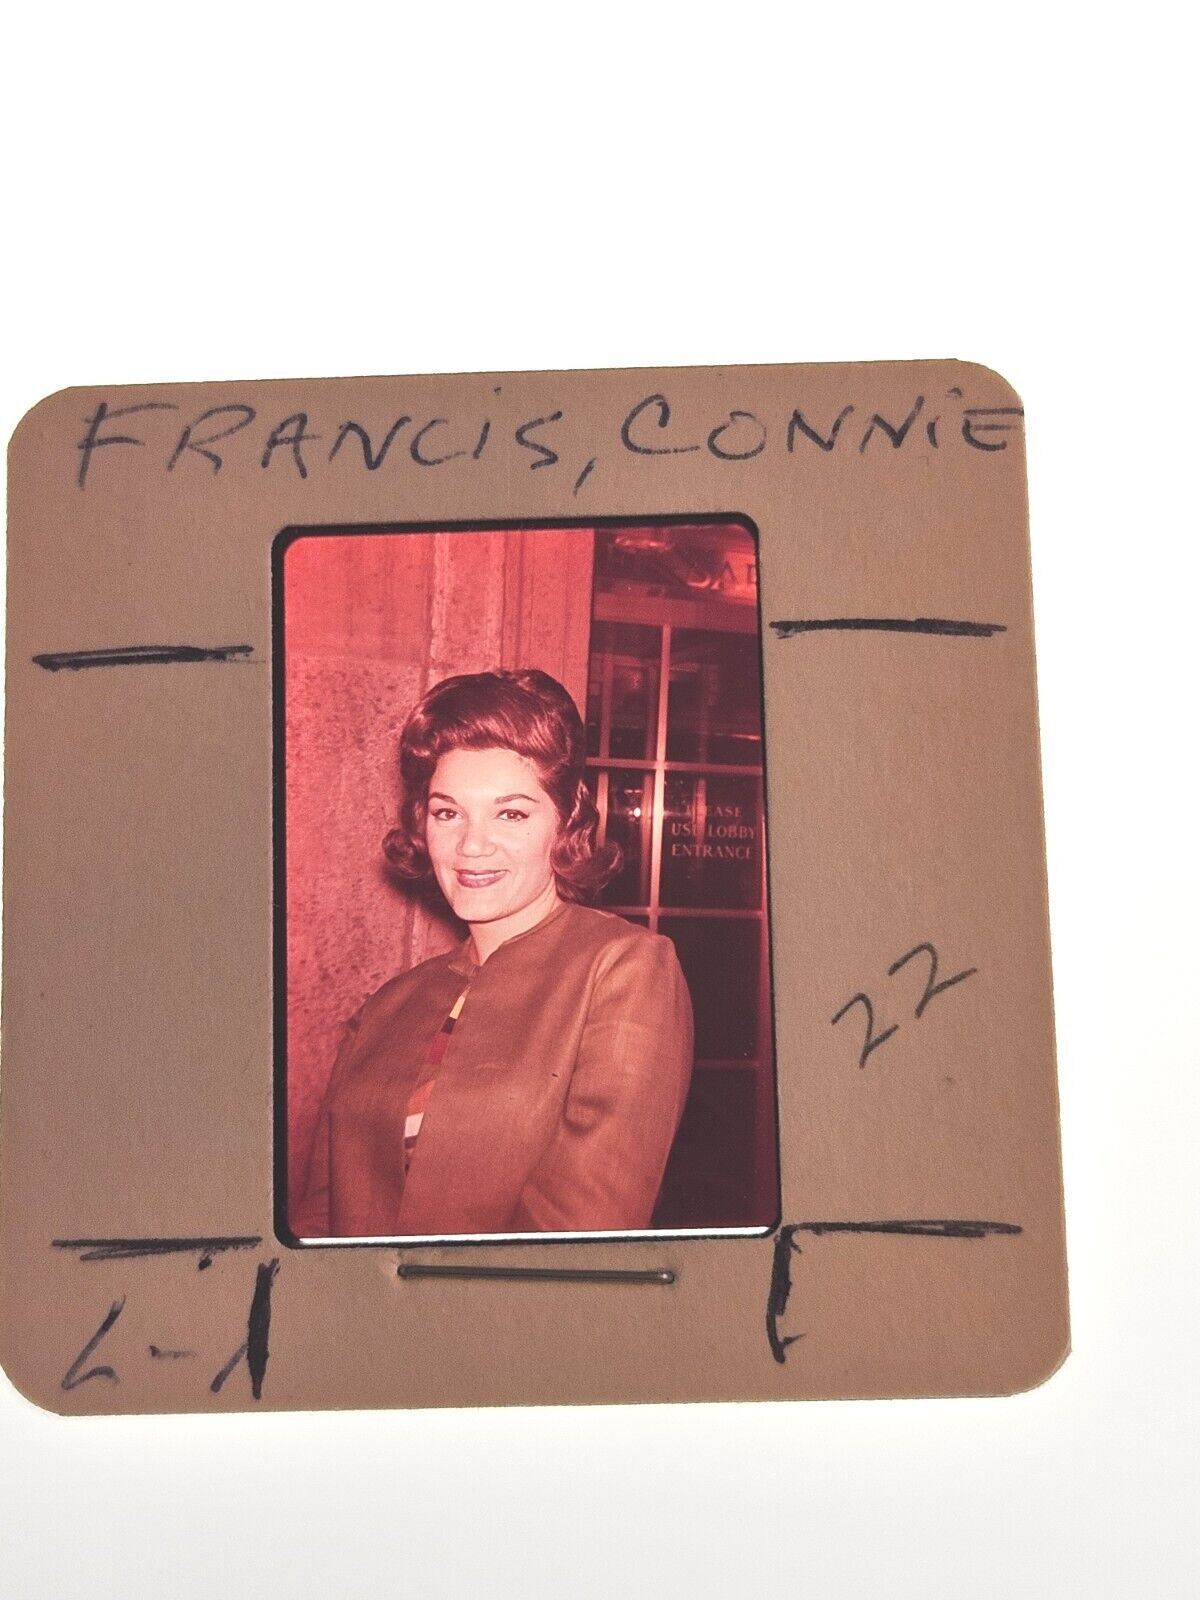 CONNIE FRANCIS ACTRESS/ SINGER  PHOTO 35MM FILM SLIDE